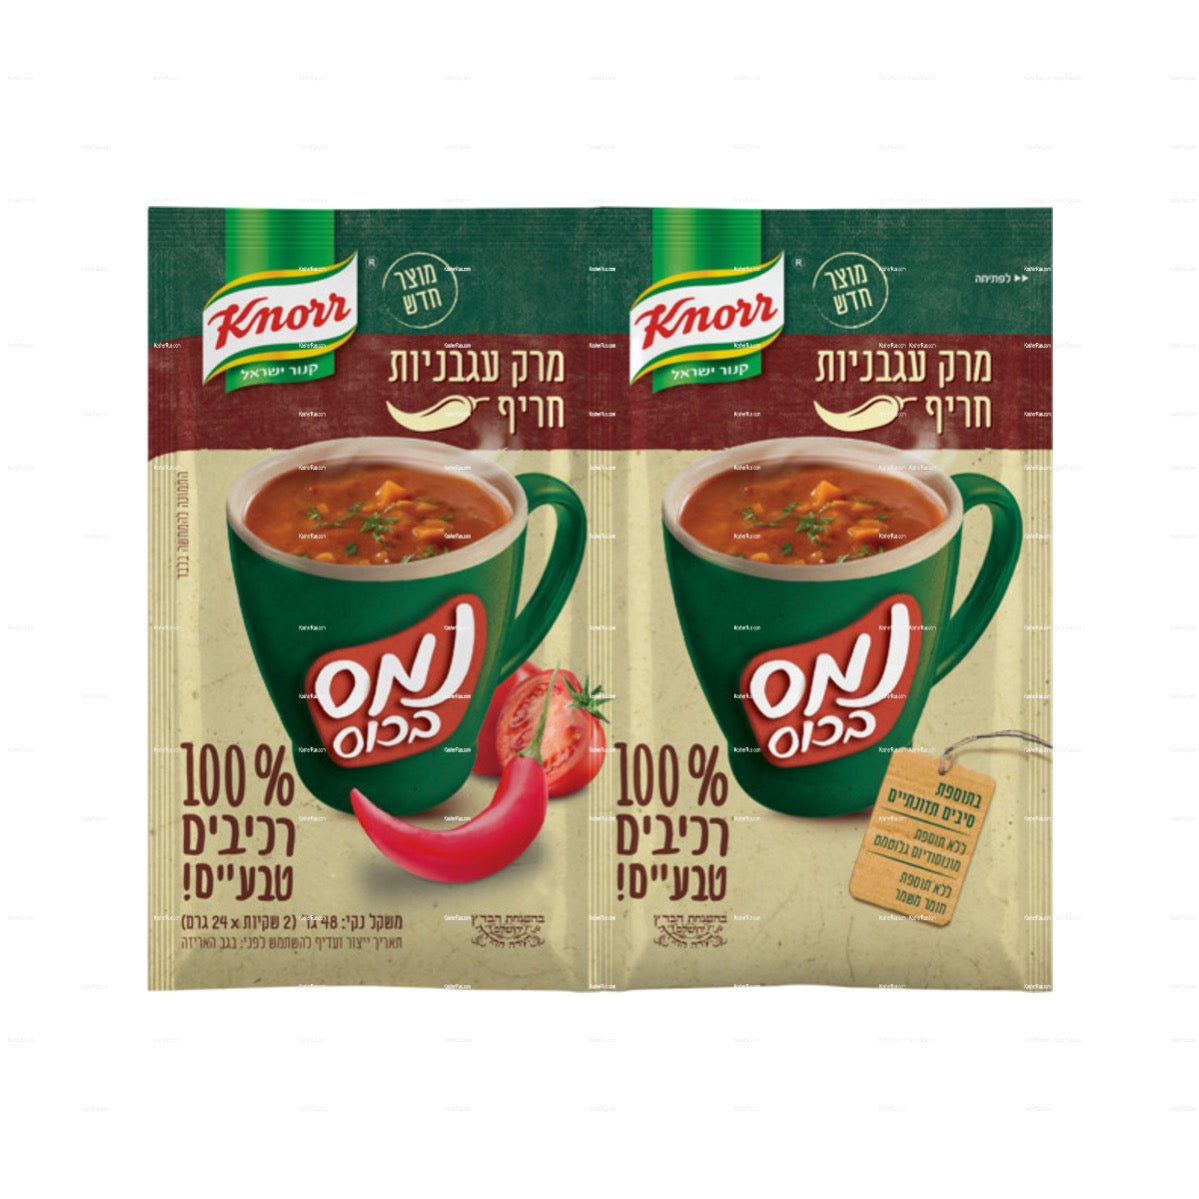 Knorr Spicy Tomato Instant Soup 2x1oz